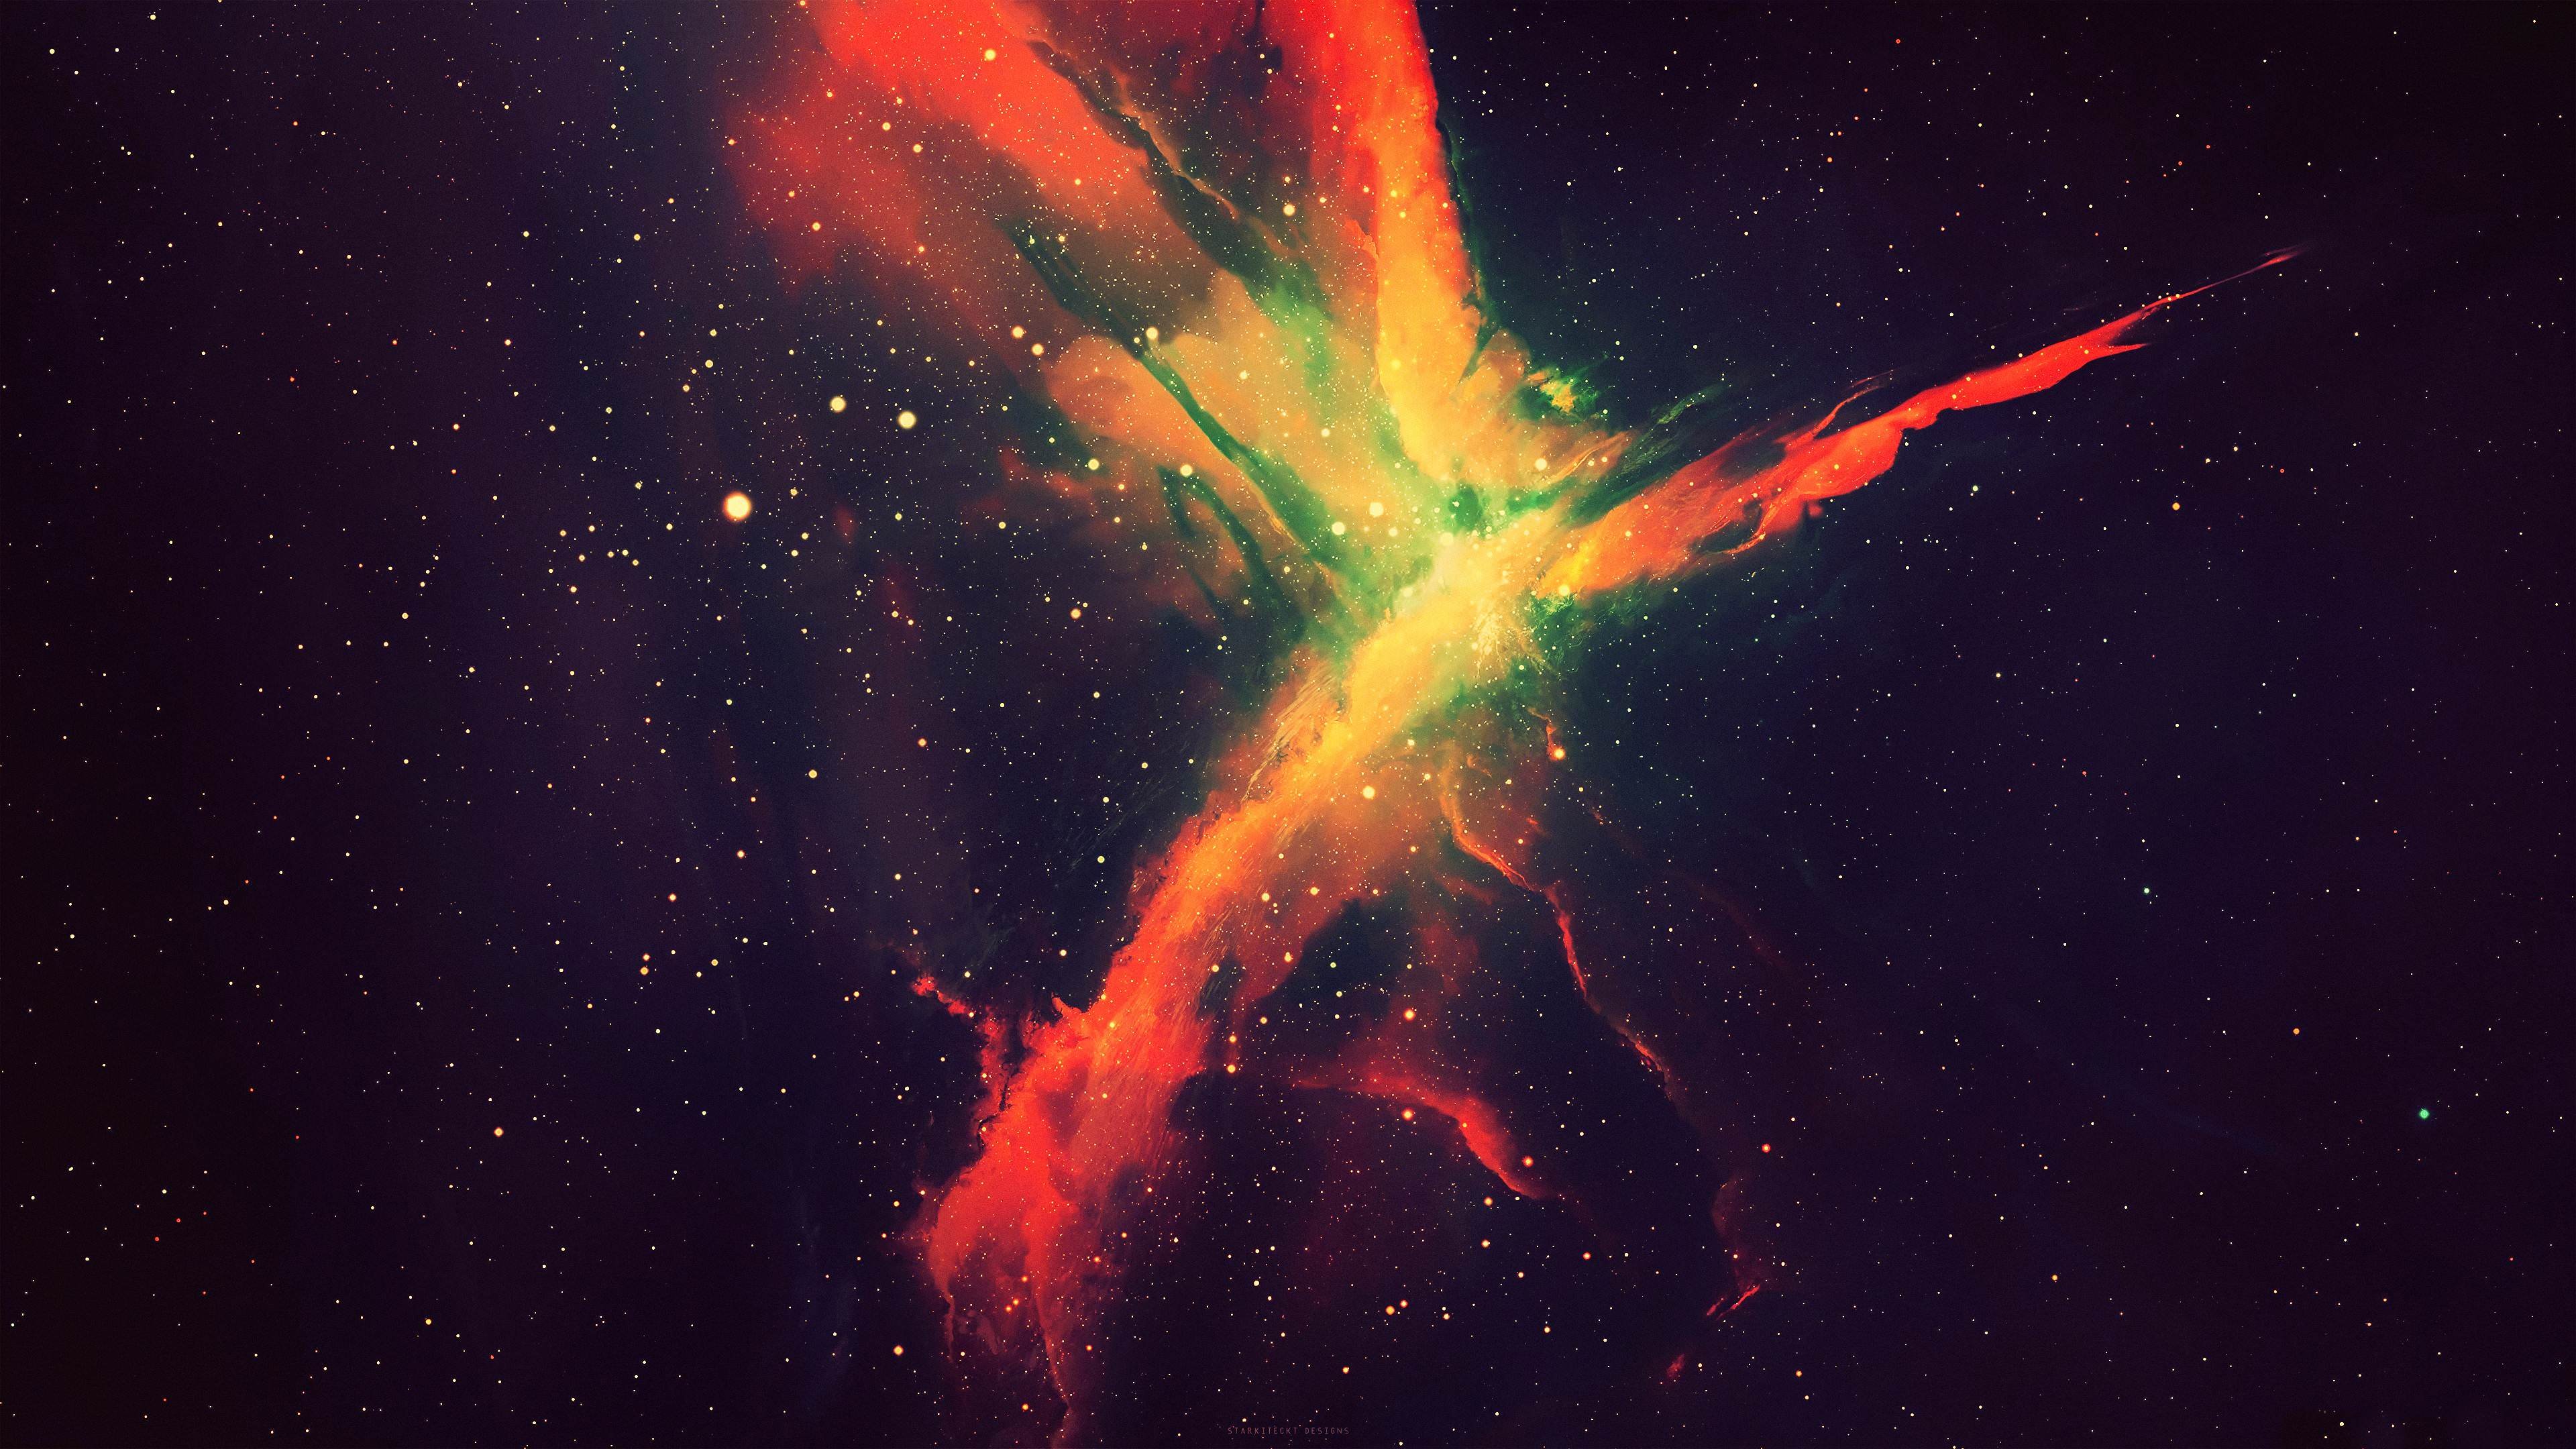 nebula wallpapers, photos and desktop backgrounds up to 8K [7680x4320